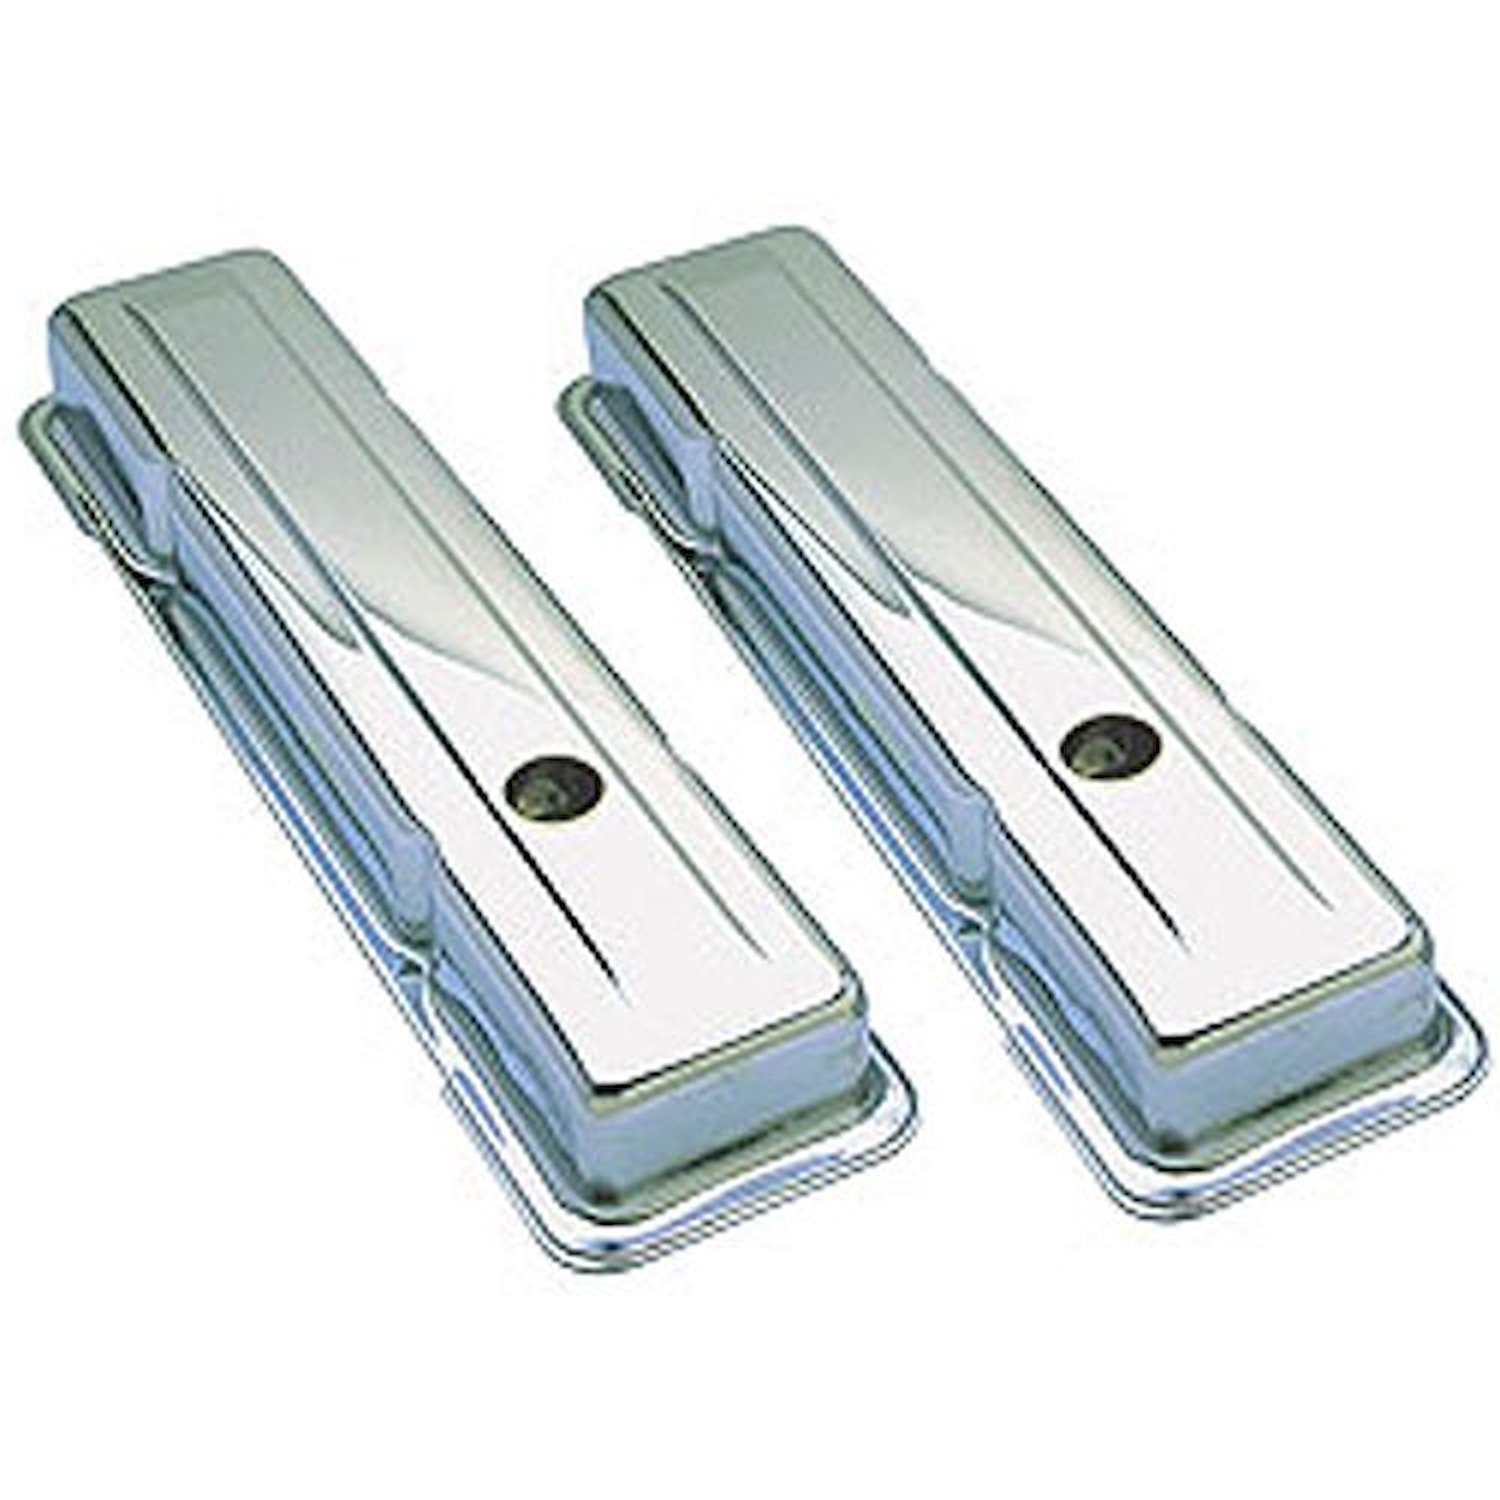 Chrome Plated Steel Valve Covers 1958-1986 Small Block Chevy 283-400 V8